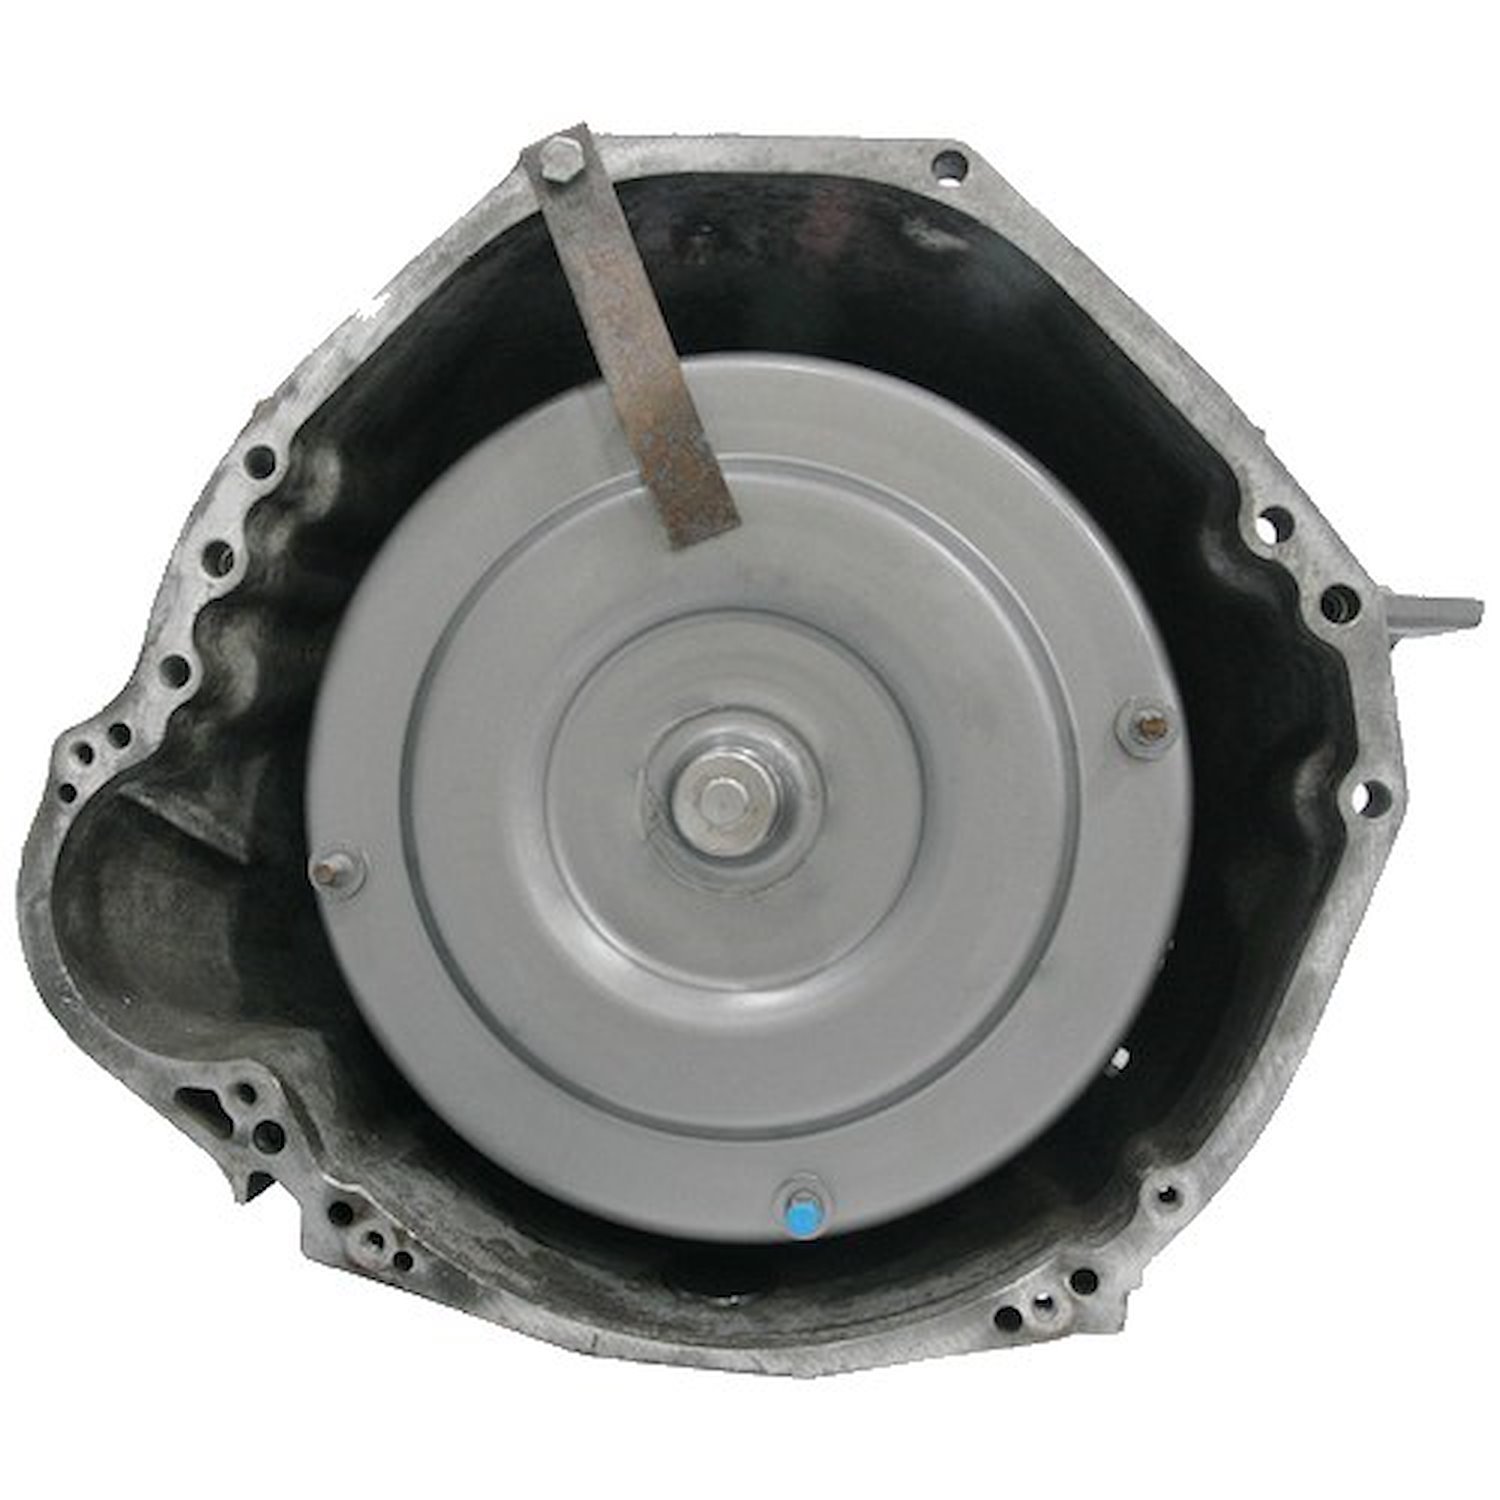 4EAT Reman Auto Trans Fits 1999-2001 Subaru Forester, Outback, Legacy SUS 30th Aniversary w/2.5L 4cyl. Eng.